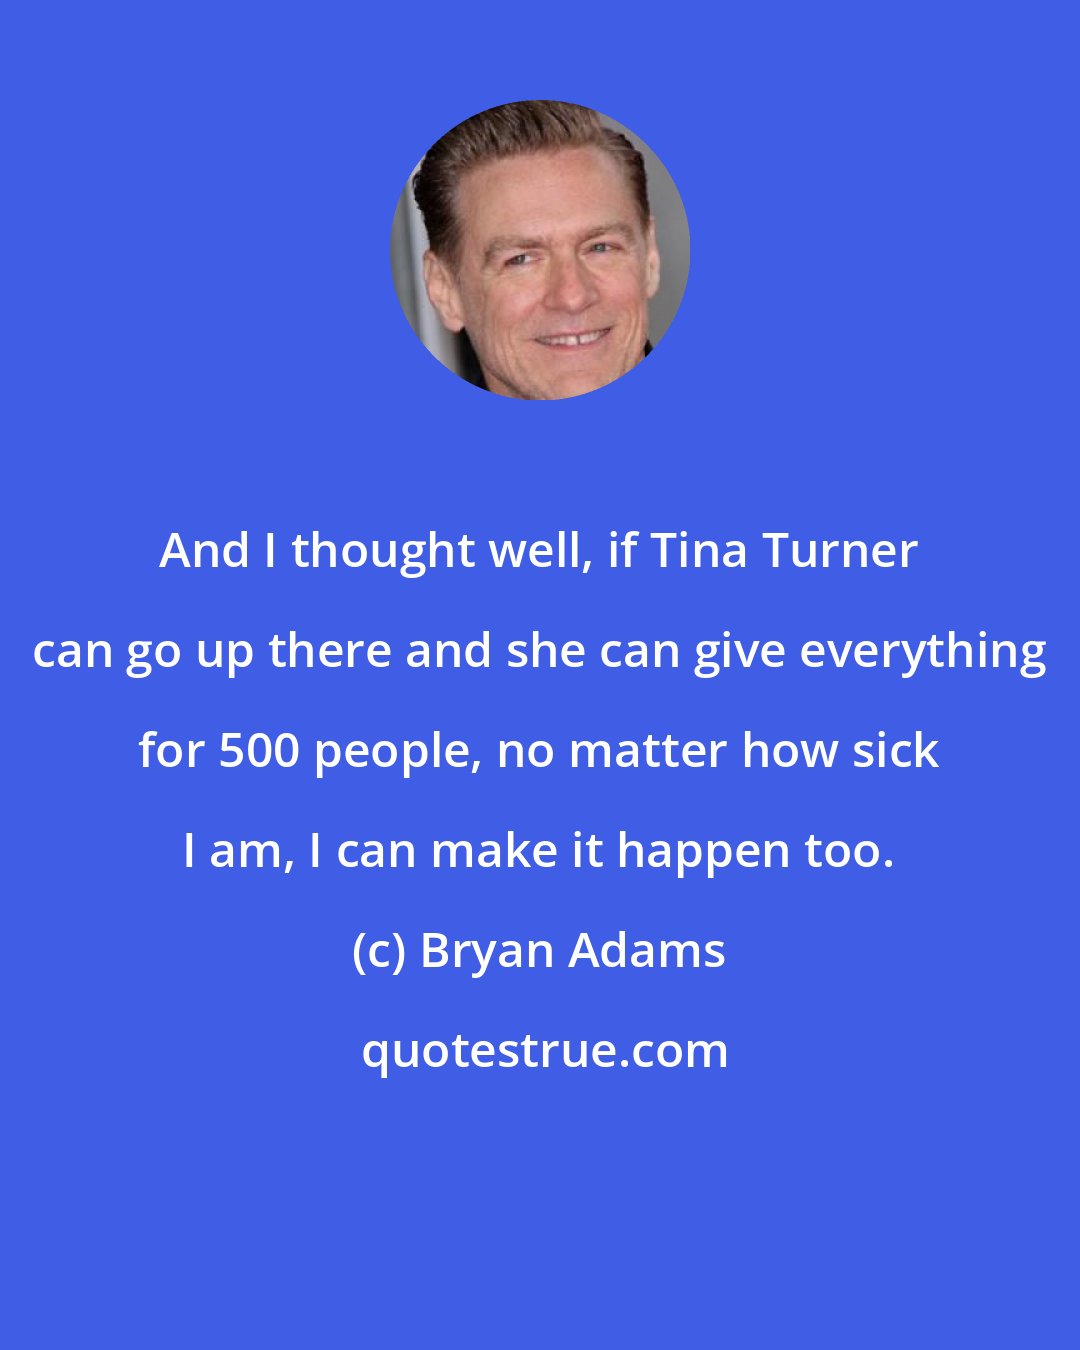 Bryan Adams: And I thought well, if Tina Turner can go up there and she can give everything for 500 people, no matter how sick I am, I can make it happen too.